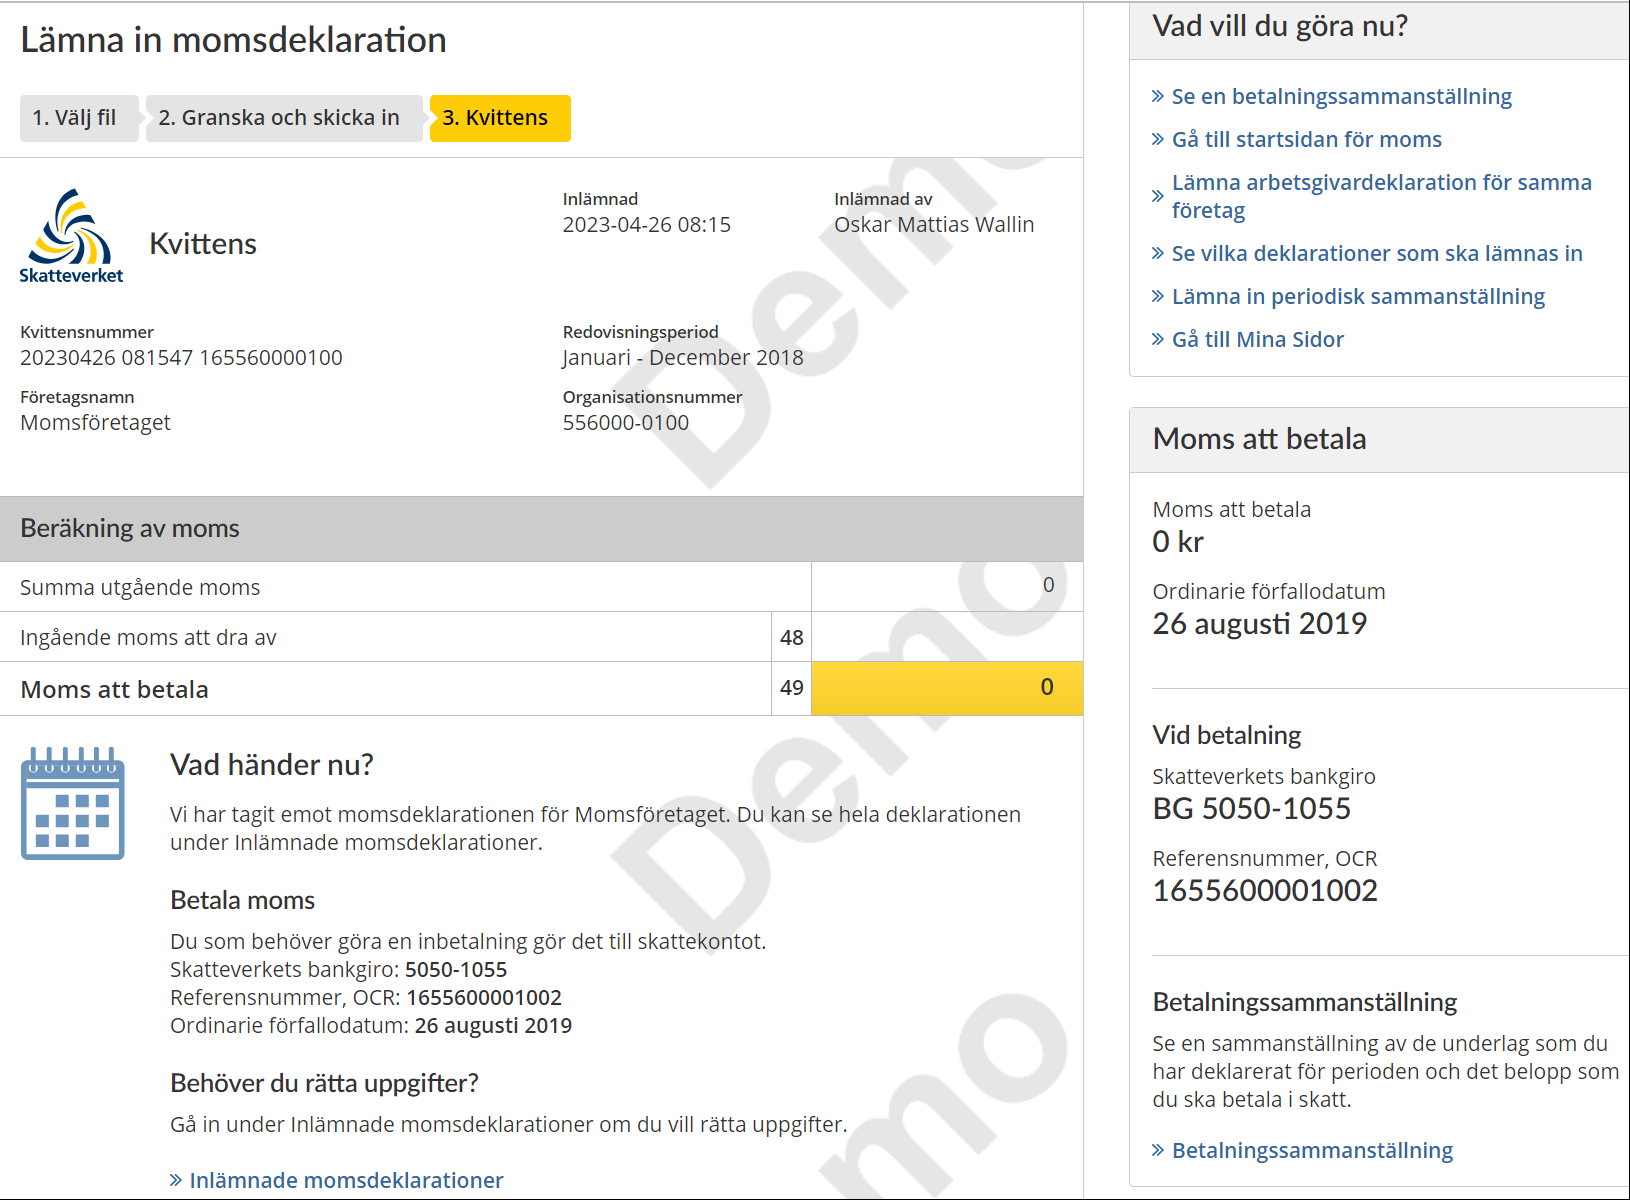 Image from the e-service showing what a receipt looks like. The image shows how much VAT you have to pay, the payment deadline, the Swedish Tax Agency’s bank giro account number and your reference number.